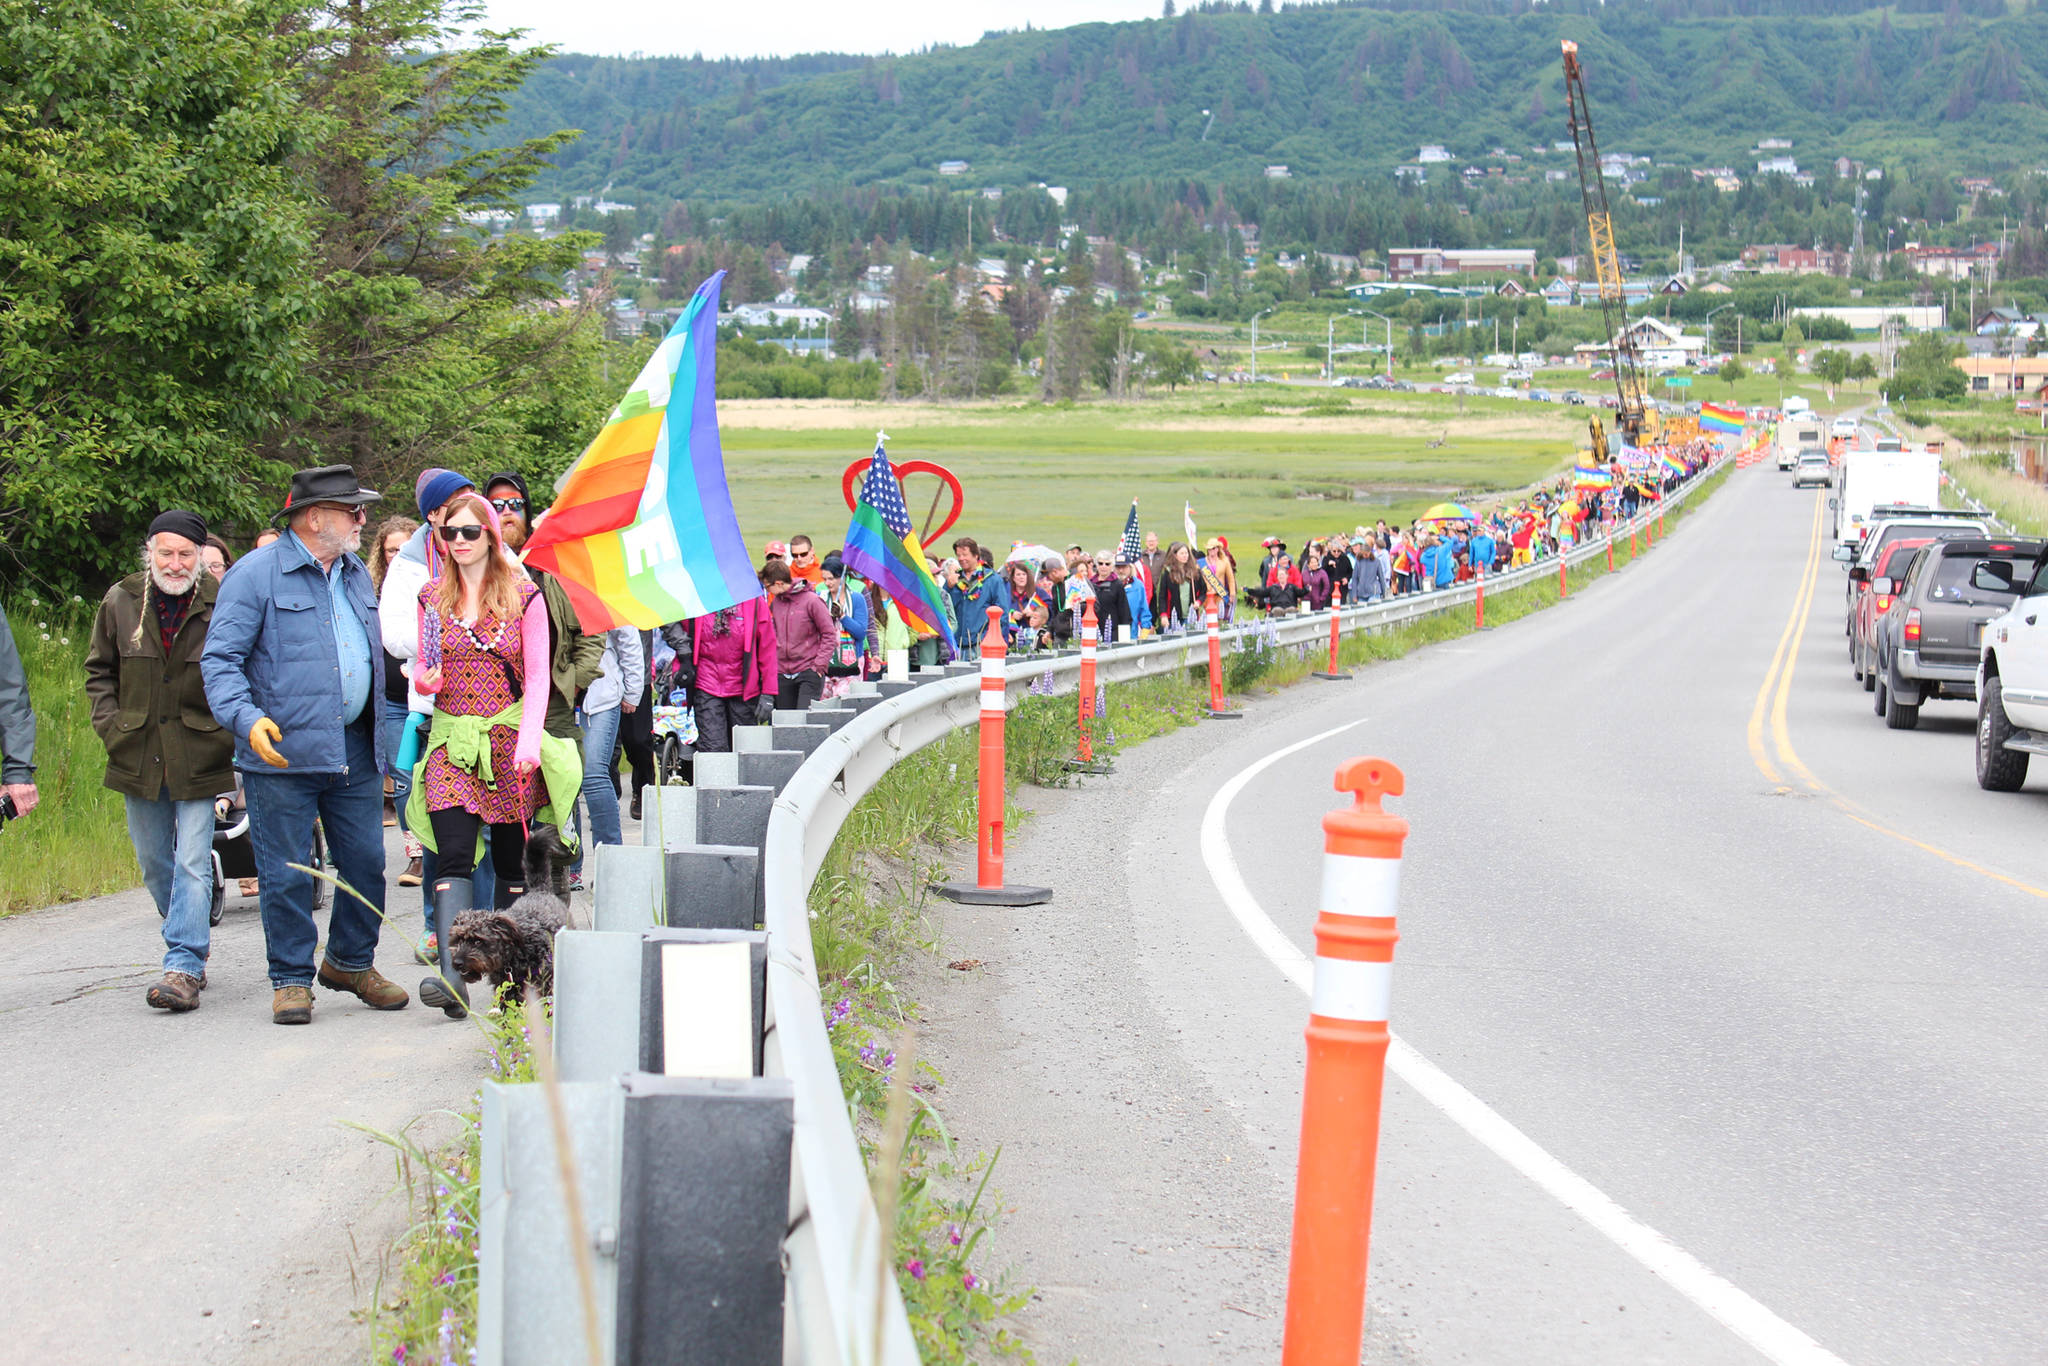 Participants in Homer’s first ever Pride March make their way across the Beluga Slough on Saturday, June 23, 2018 in Homer, Alaska. (Homer News file photo)